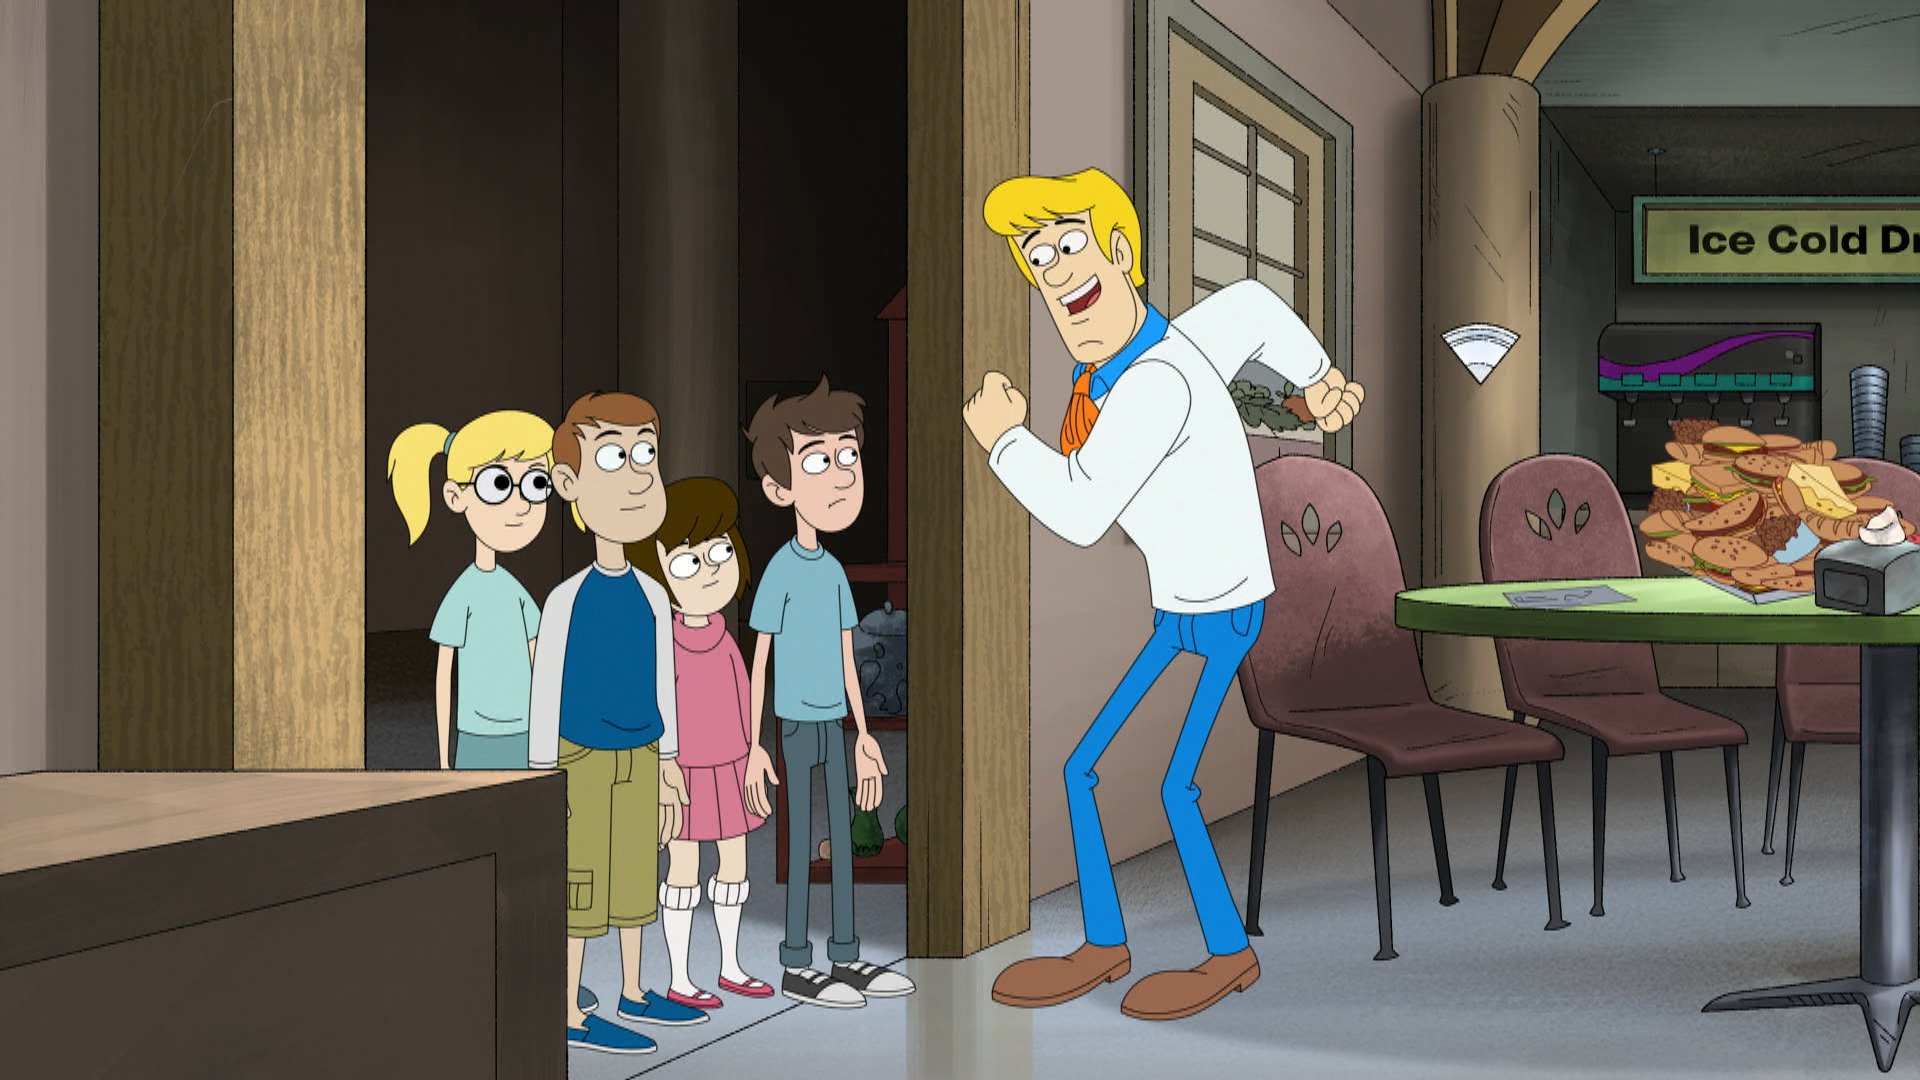 Watch Be Cool, Scooby-Doo! Season 1 Episode 6 Online - Stream Full Episodes